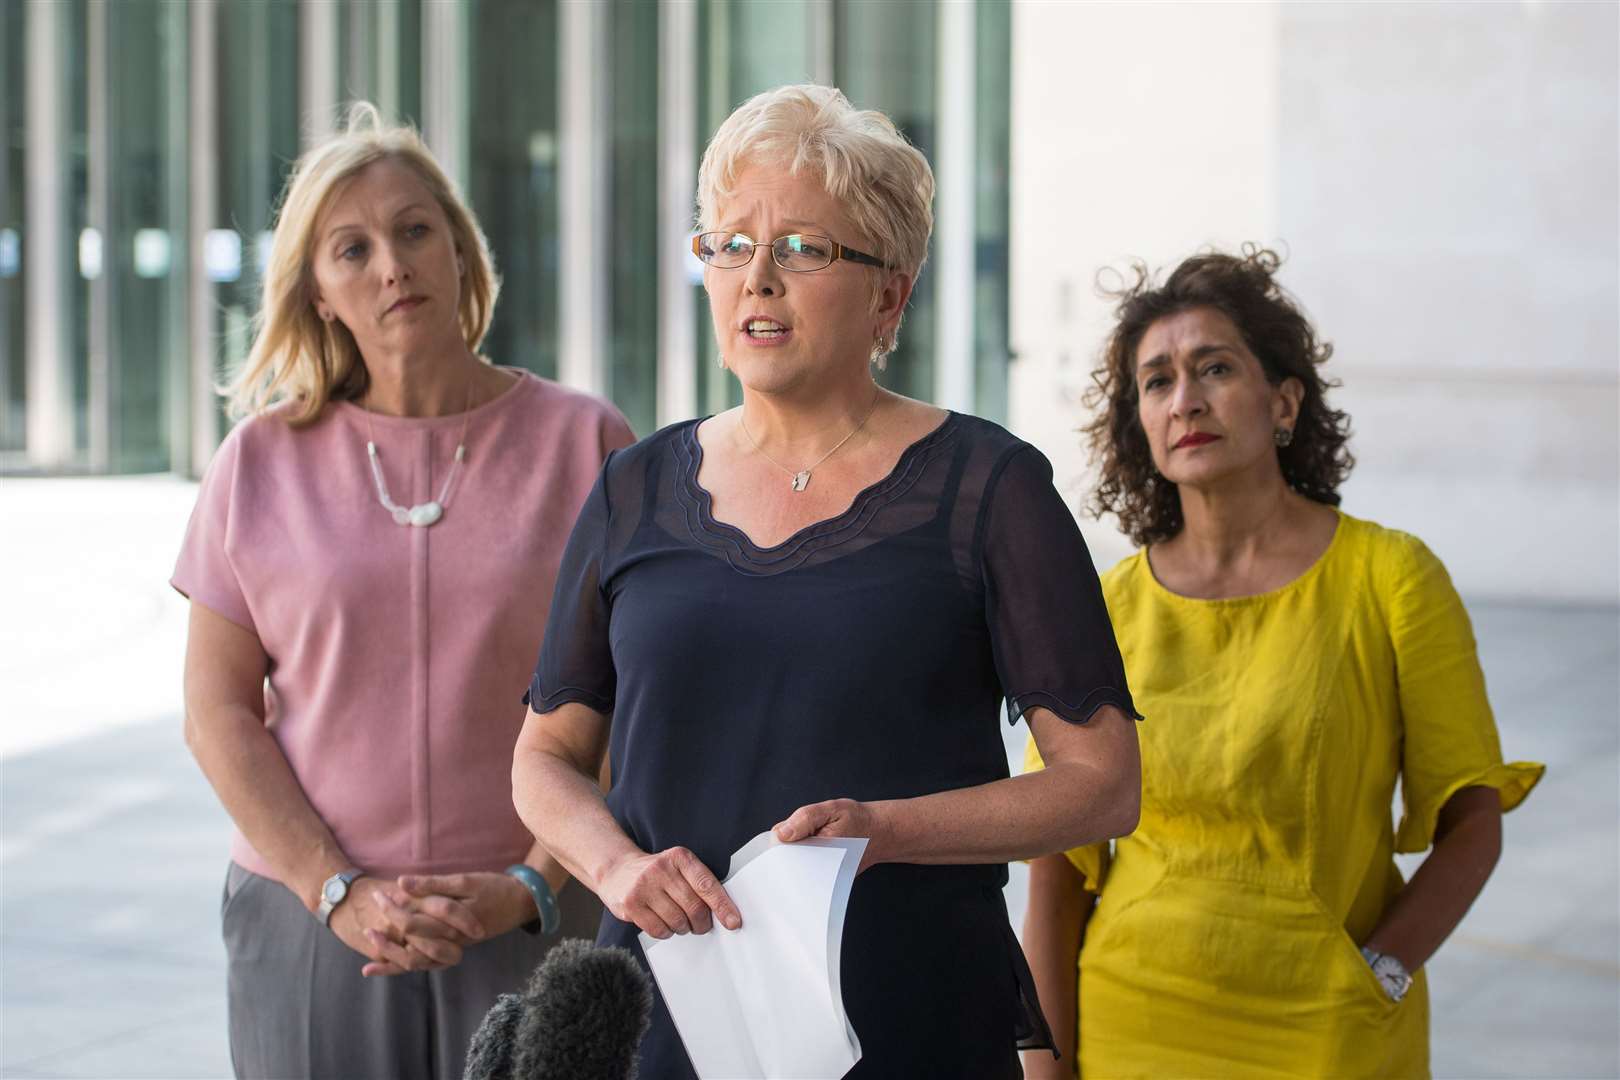 Martine Croxhall (left) with Carrie Gracie (centre) and Razia Iqbal (right) after Ms Gracie resolved her equal-pay dispute with the BBC (Dominic Lipinski/PA)